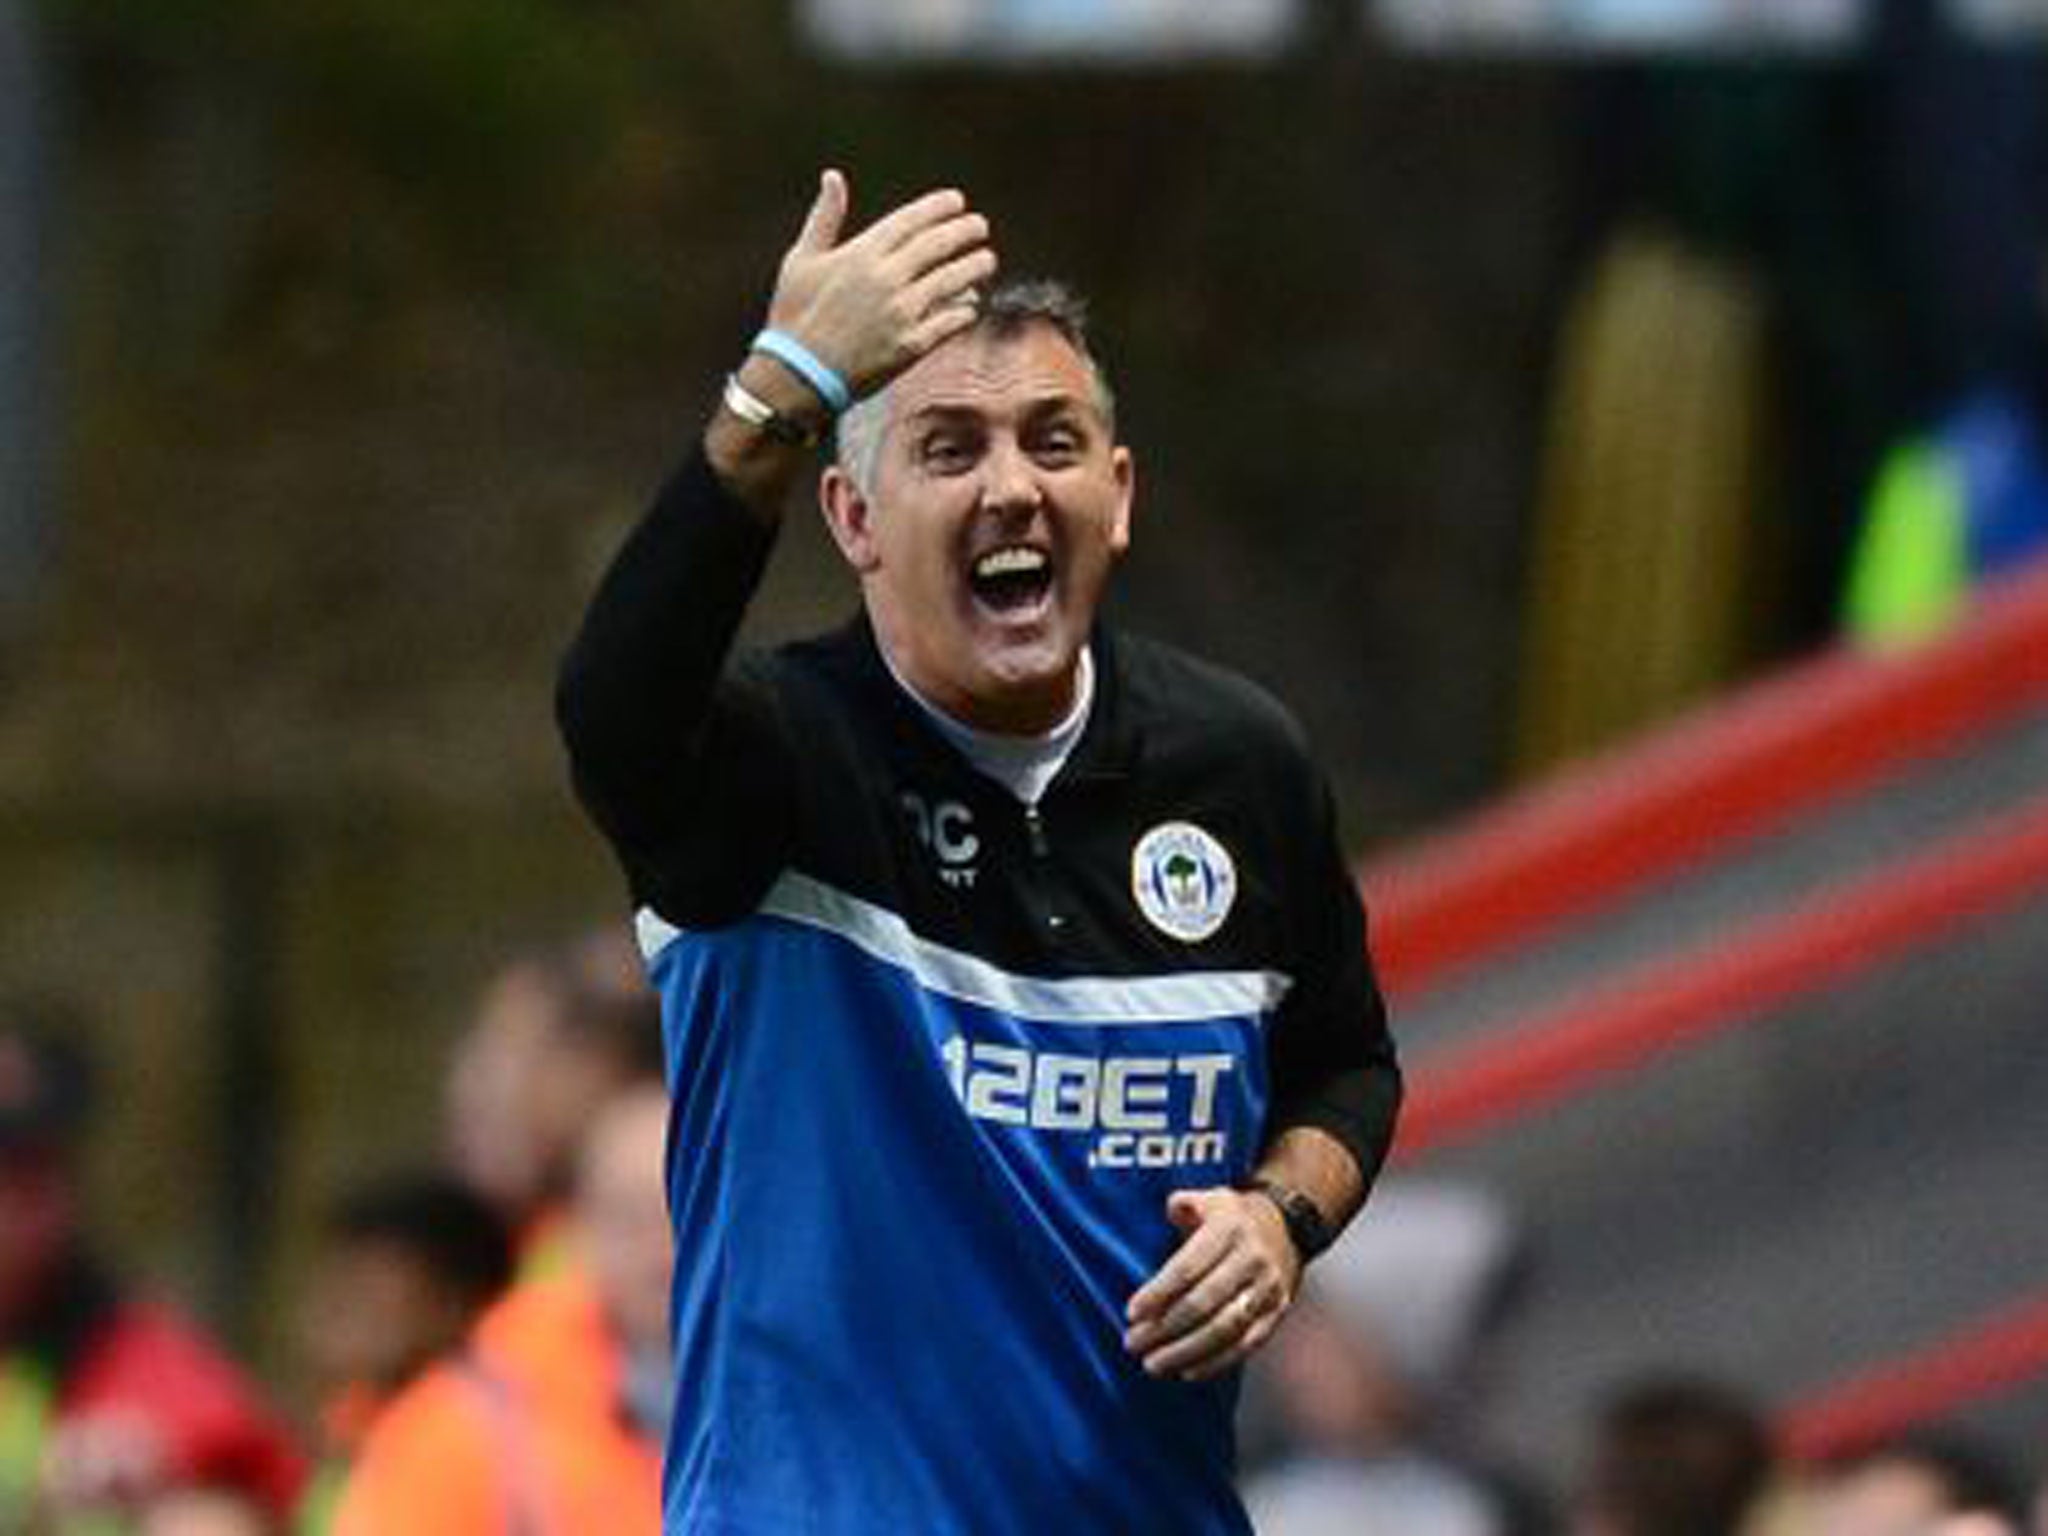 Wigan manager Owen Coyle